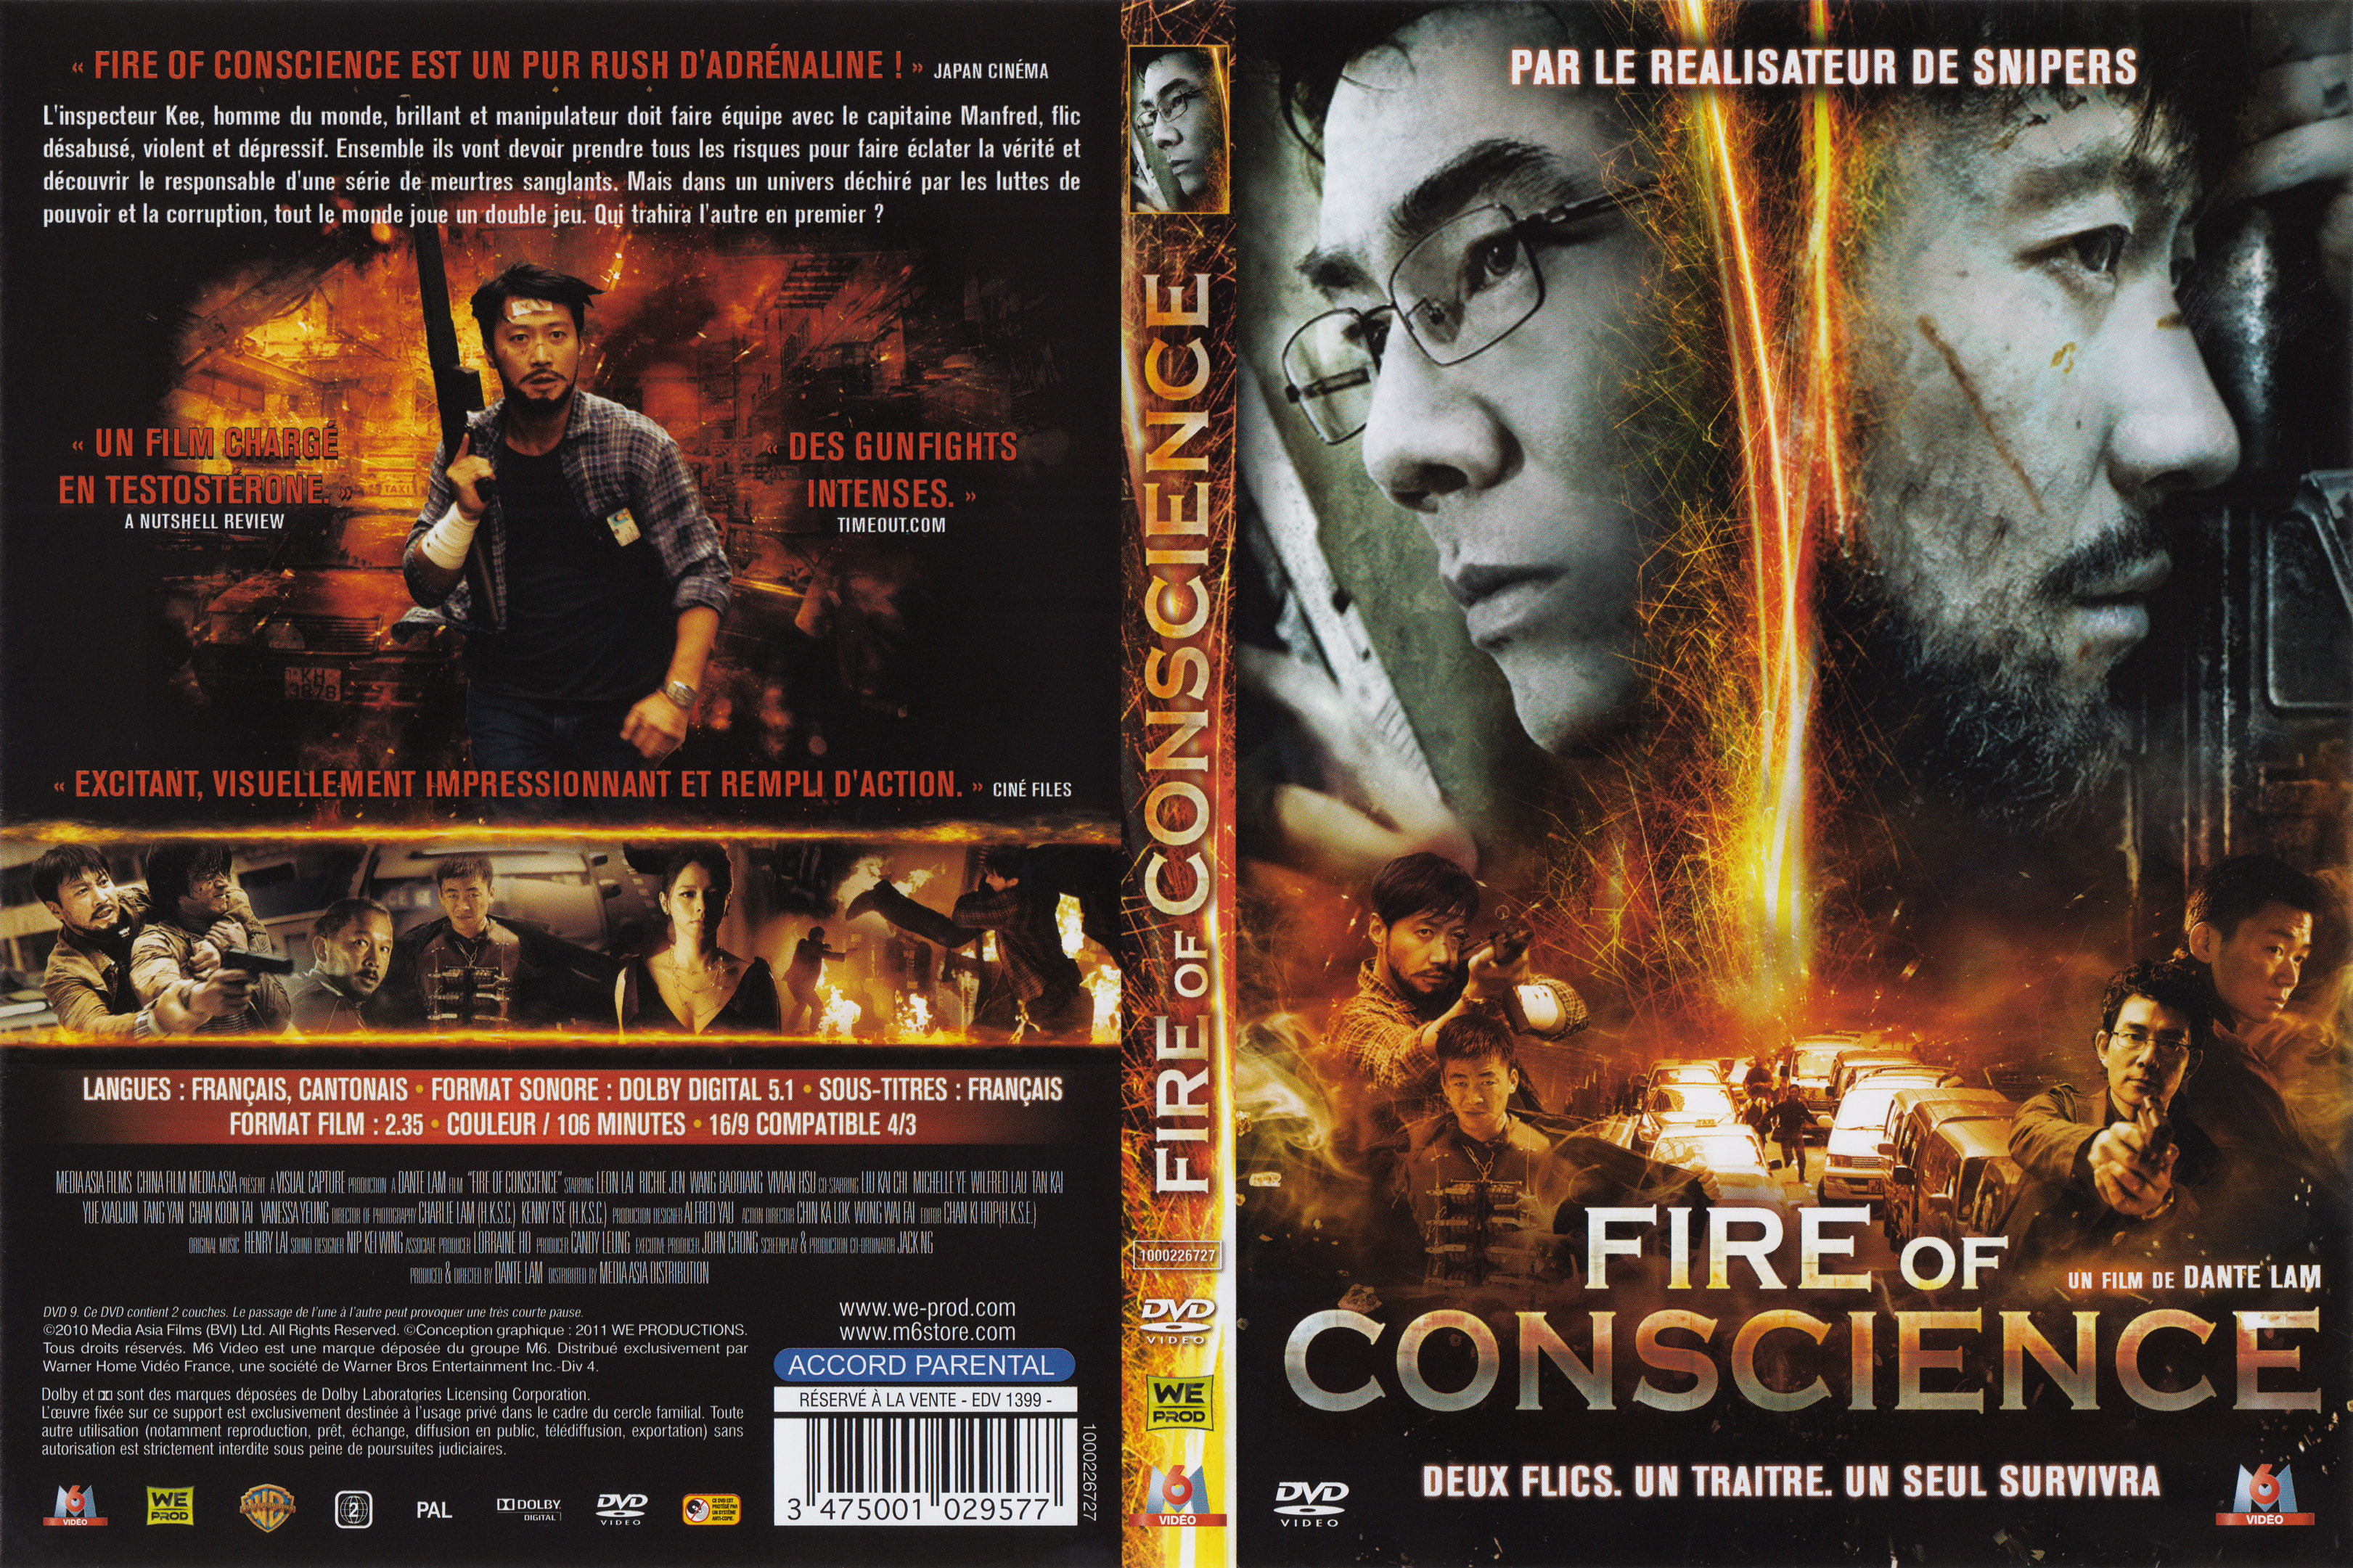 Jaquette DVD Fire of conscience